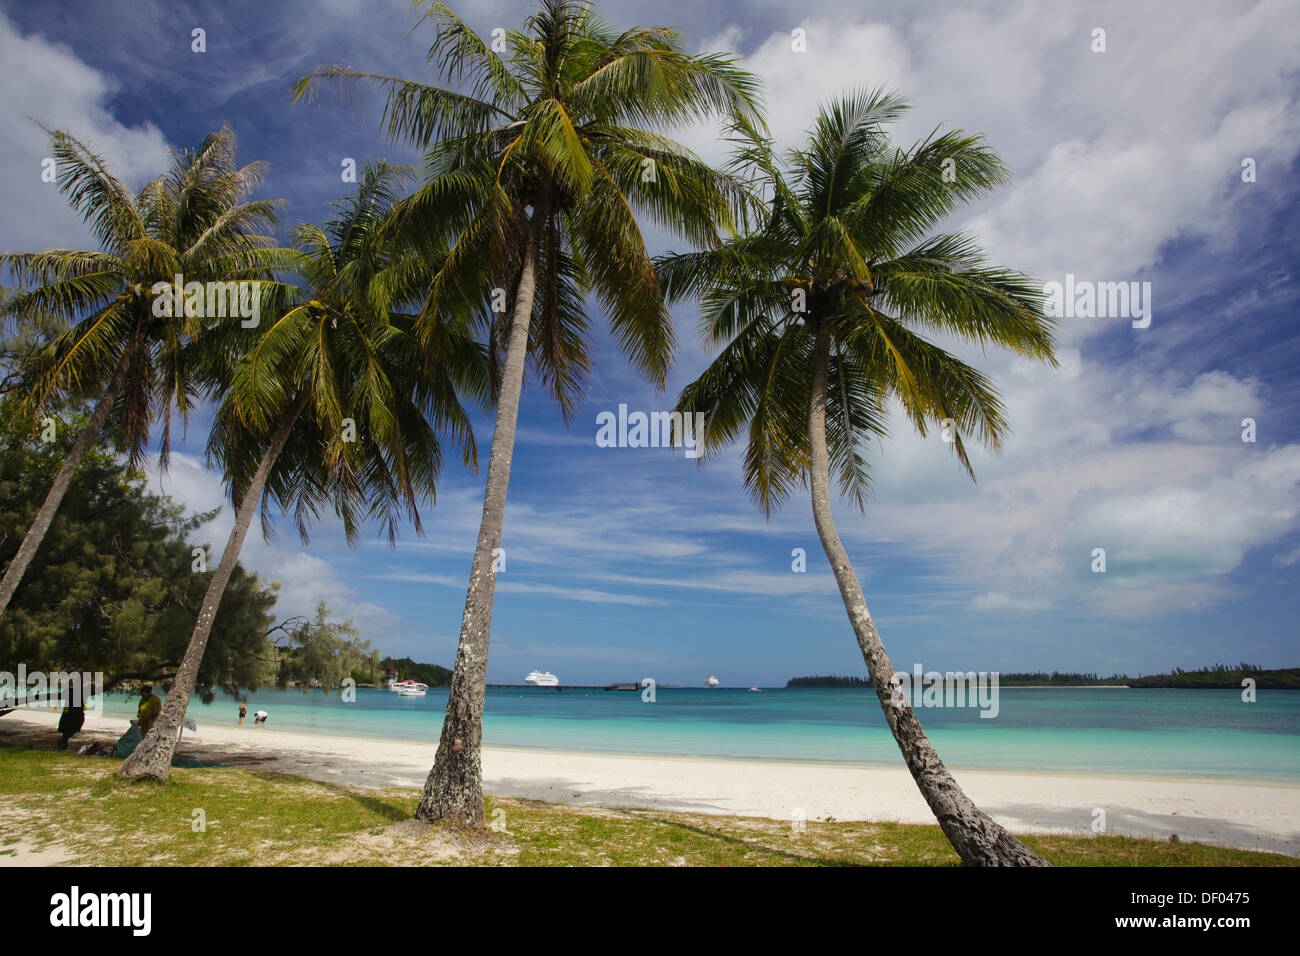 White South Seas sand beach with turquoise blue water and palm trees, Île des Pins, New Caledonia, France Stock Photo